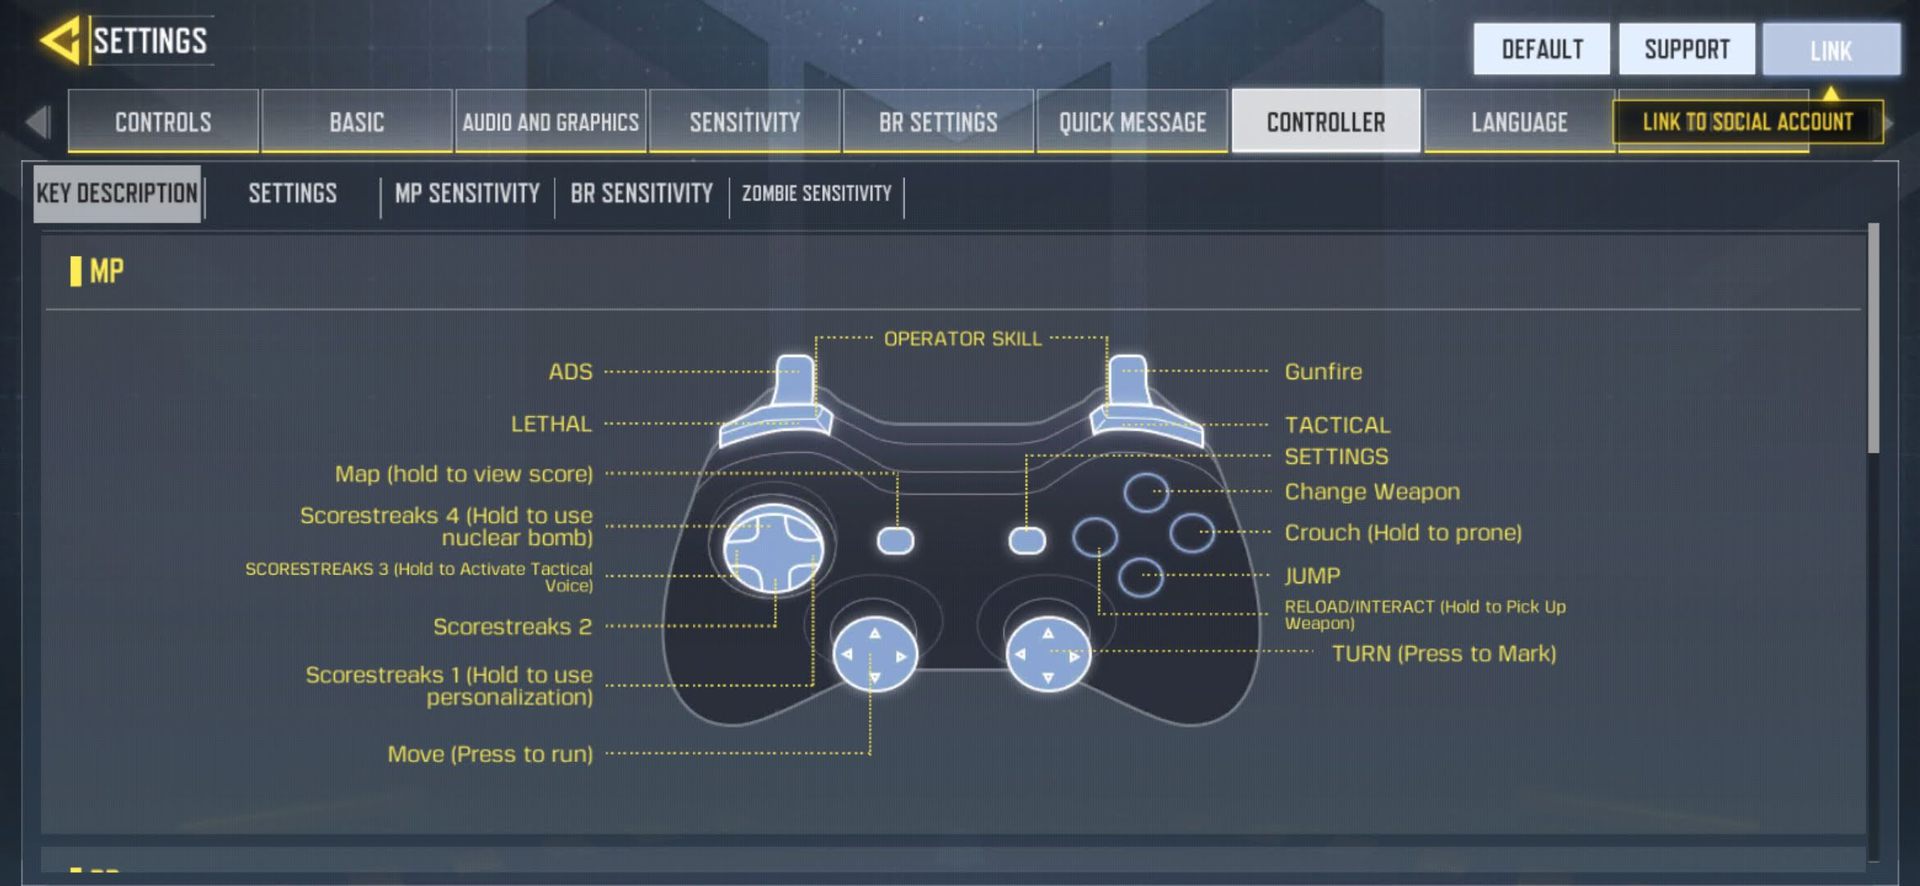 How to Play Call of Duty Mobile with Controller *NEW* (IPHONE) (ANDROID) 